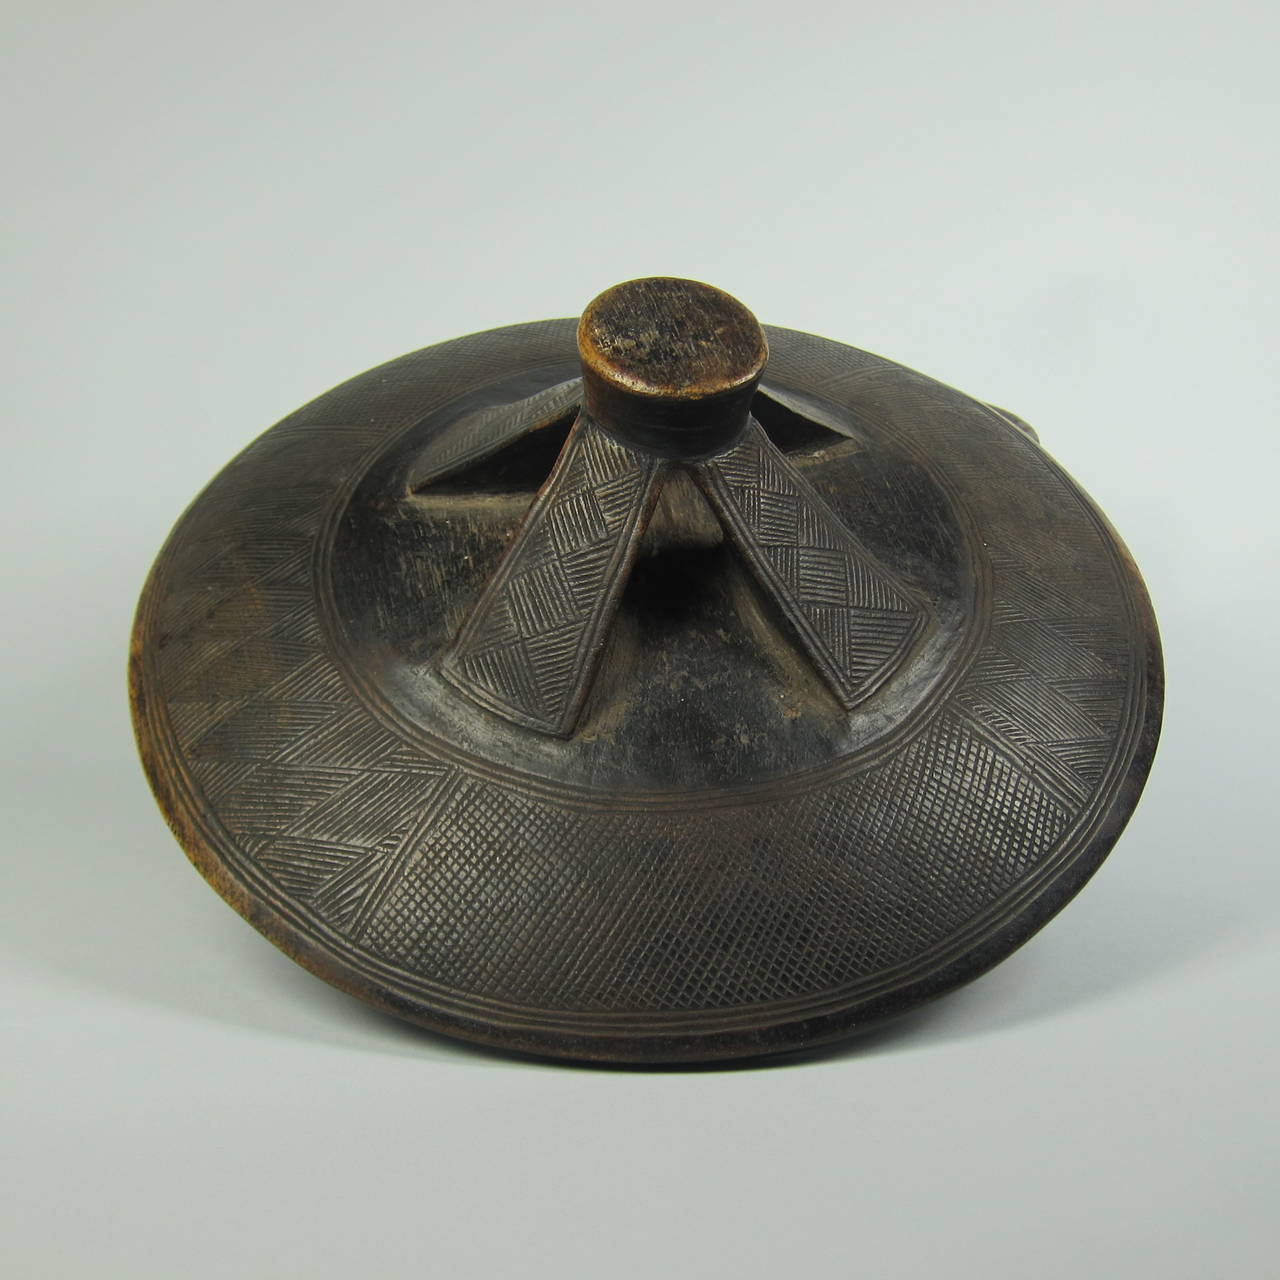 An extremely fine wood Lozi lidded vessel, Zambia, circa 1930s.

At the turn of the 20th century, vessels decorated with zoomorphic or geometric handles became the decorative art form in Western collections that epitomized Lozi culture. 

The